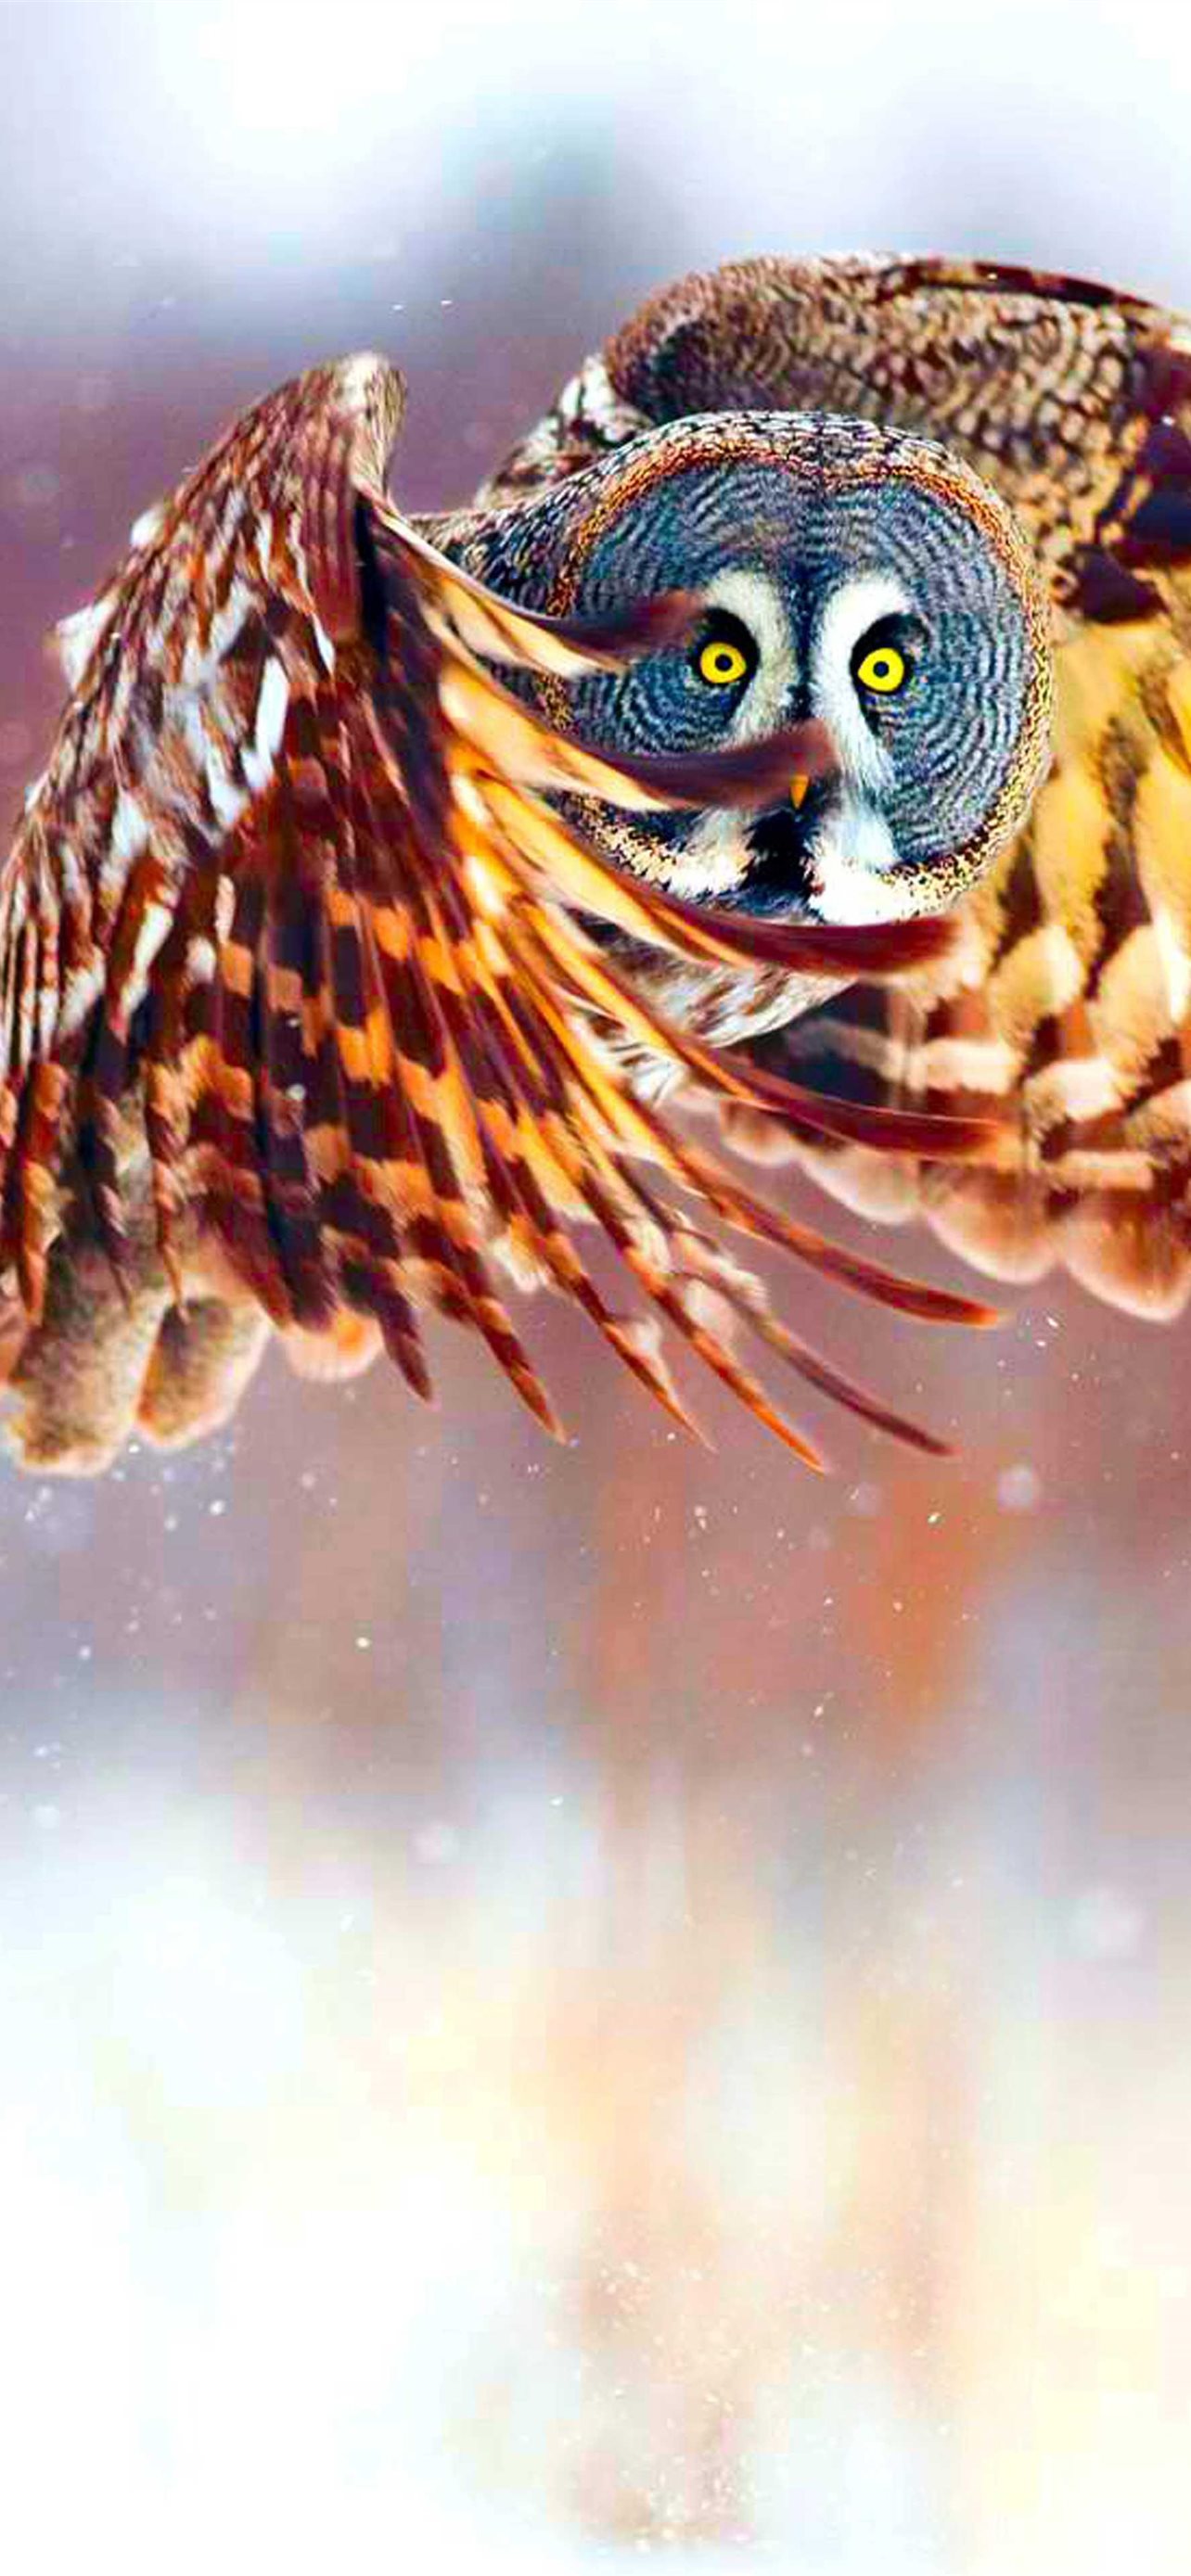 Cool owl top free cool owl backgrounds access iphone wallpapers free download